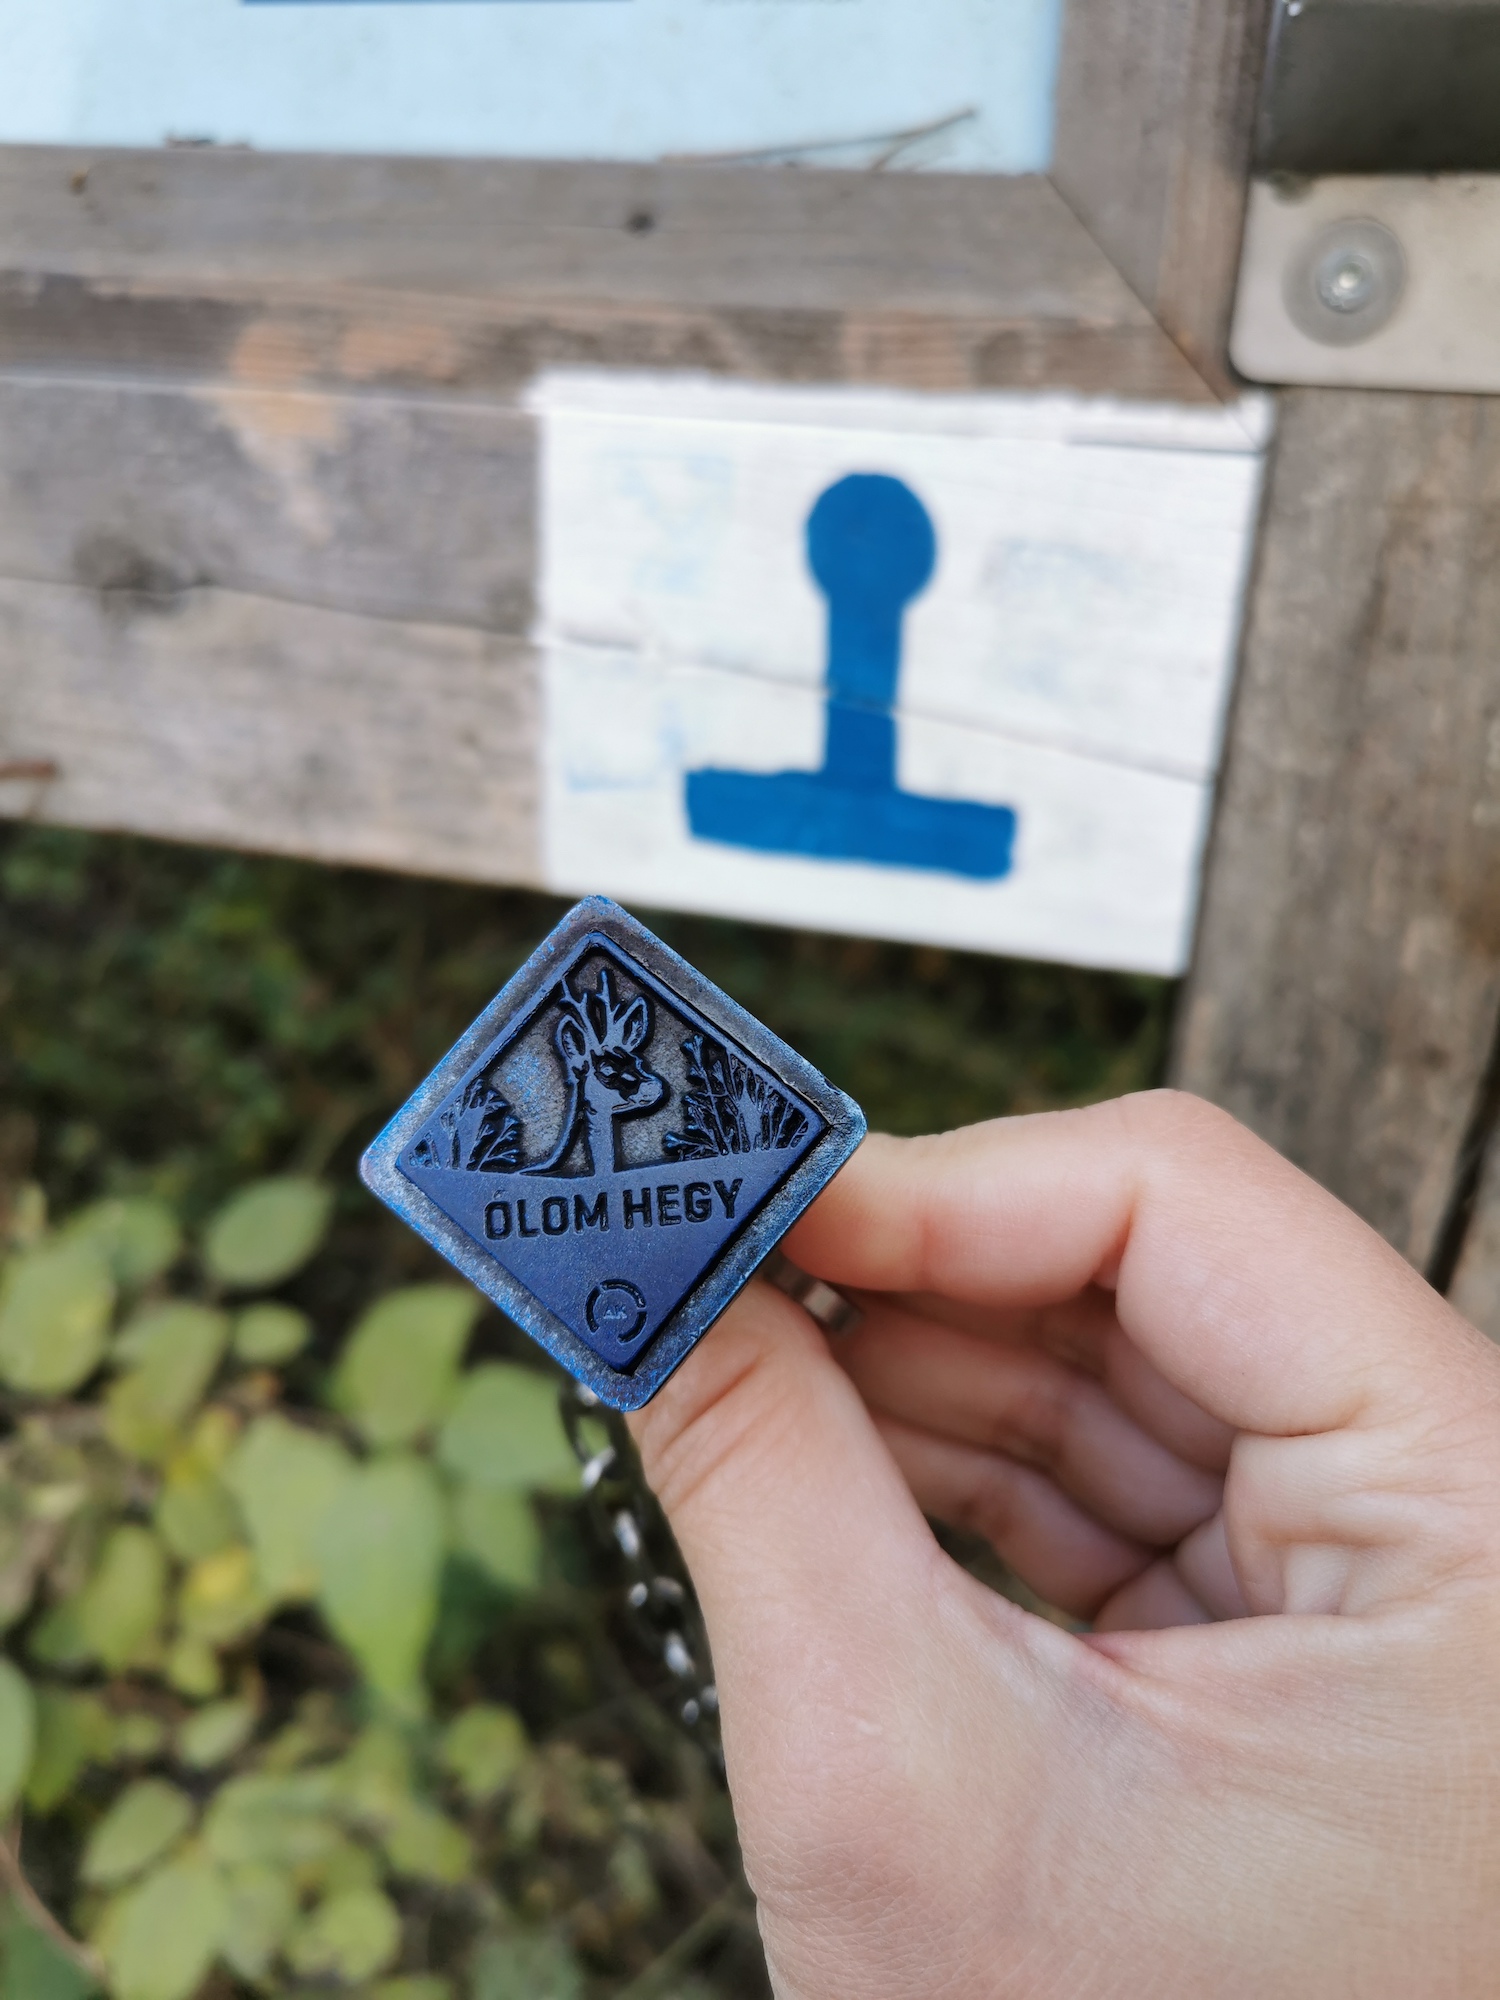 Stamps for hikers along the Blue Trail. Image: Orsi Szombati